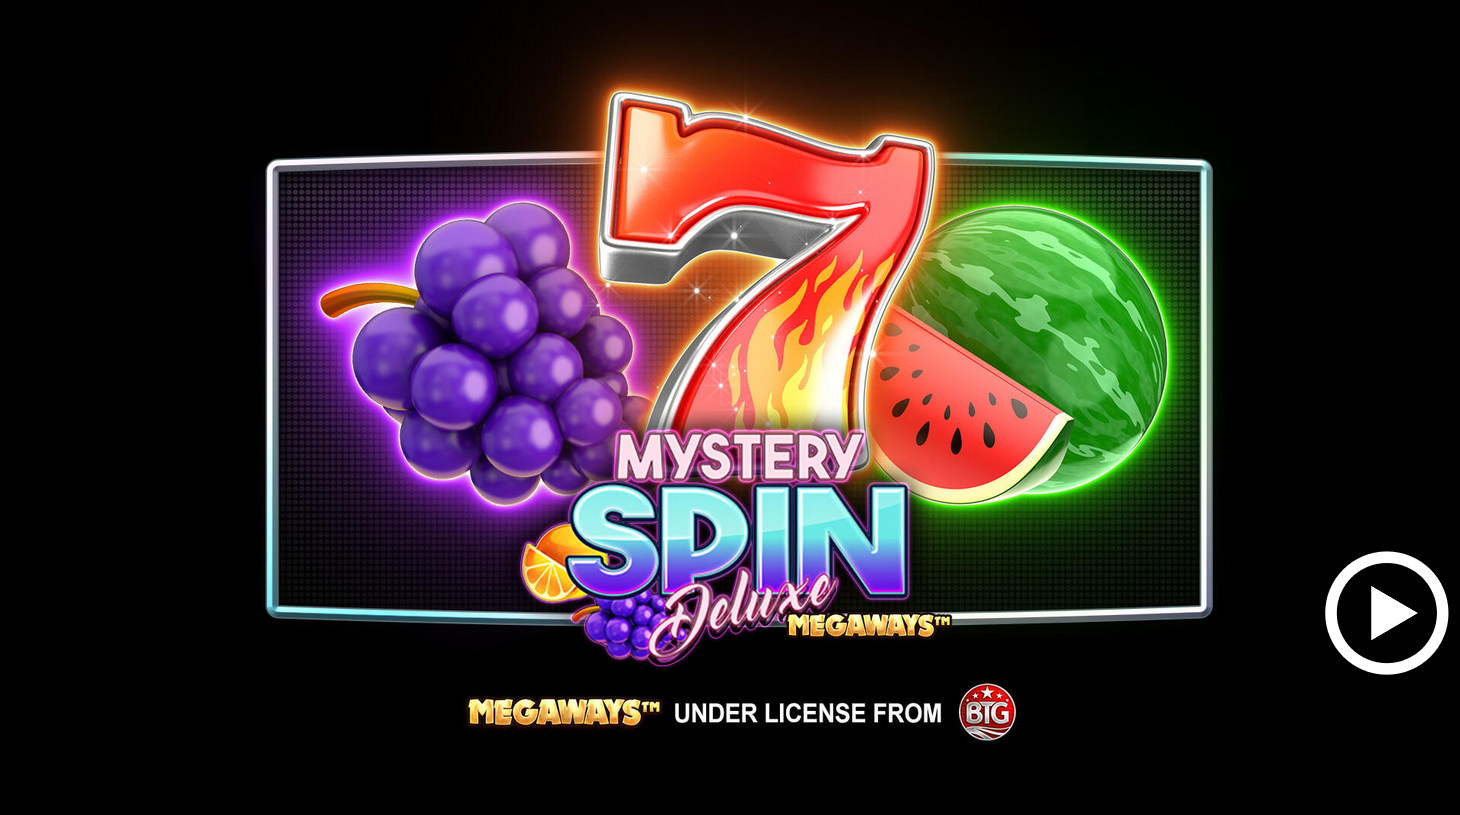 Spin deluxe. Игровой автомат mysterious. Twin Spin слот. Mystery Reels Deluxe Slot. Megaways Mystery.